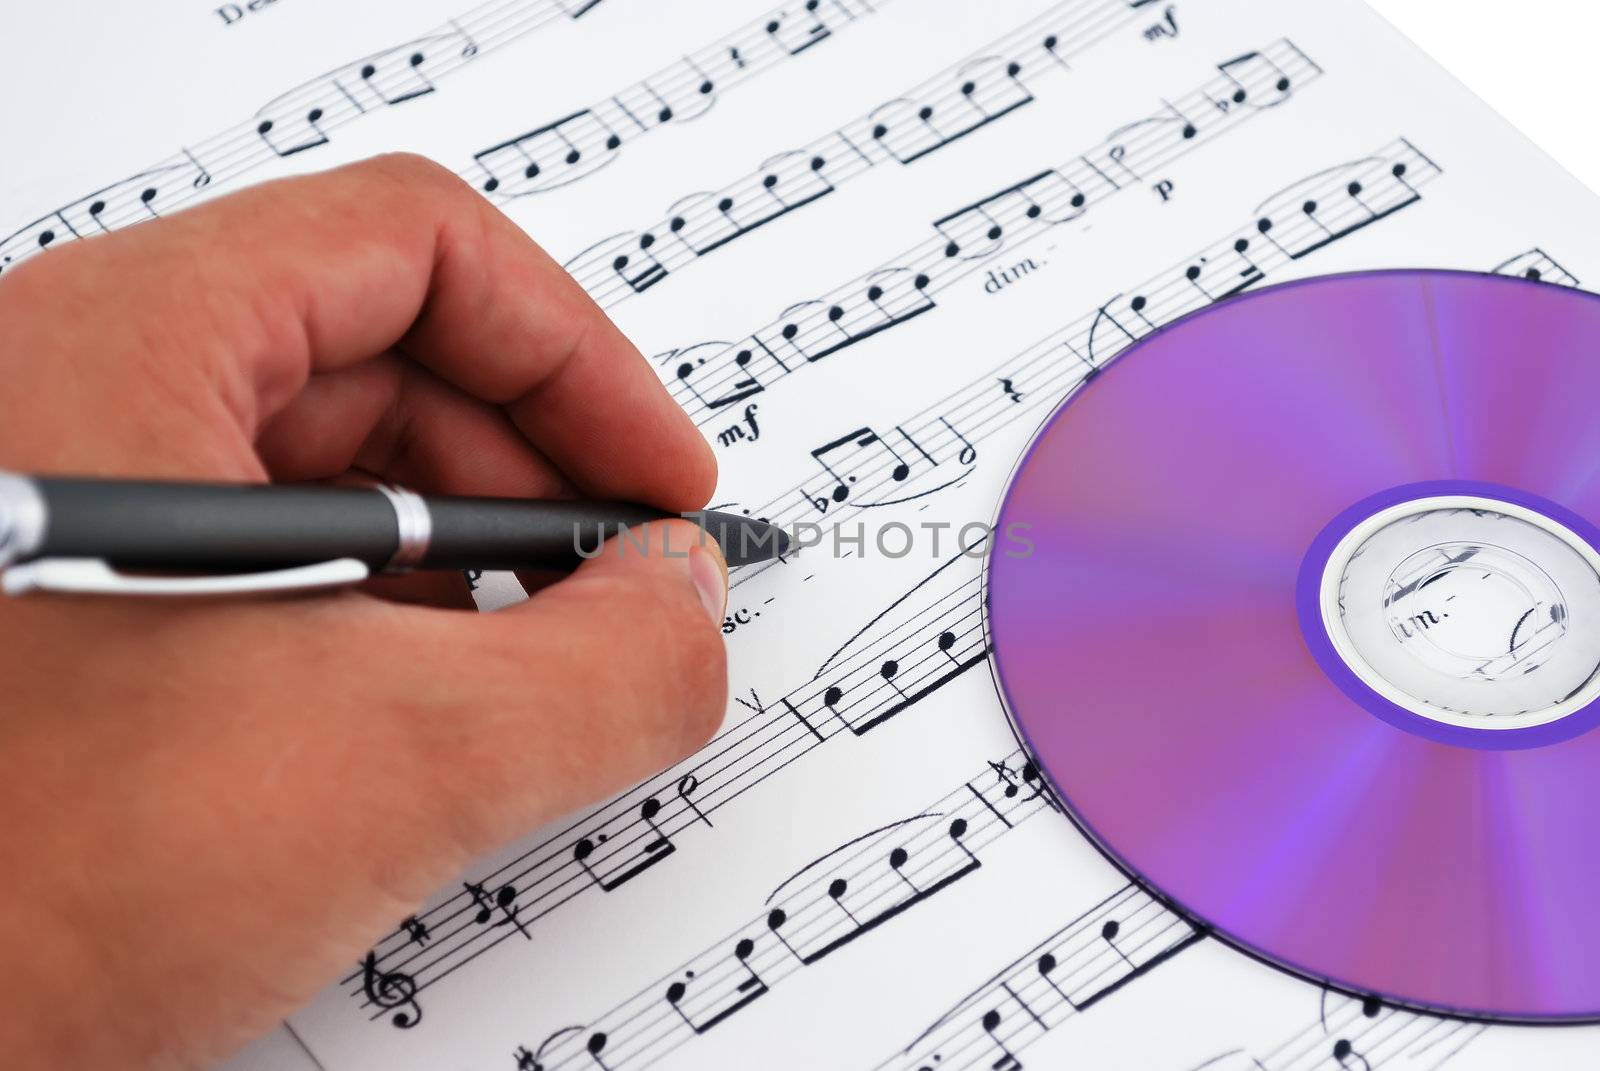 cd or dvd drive, musical notes and hand make notes